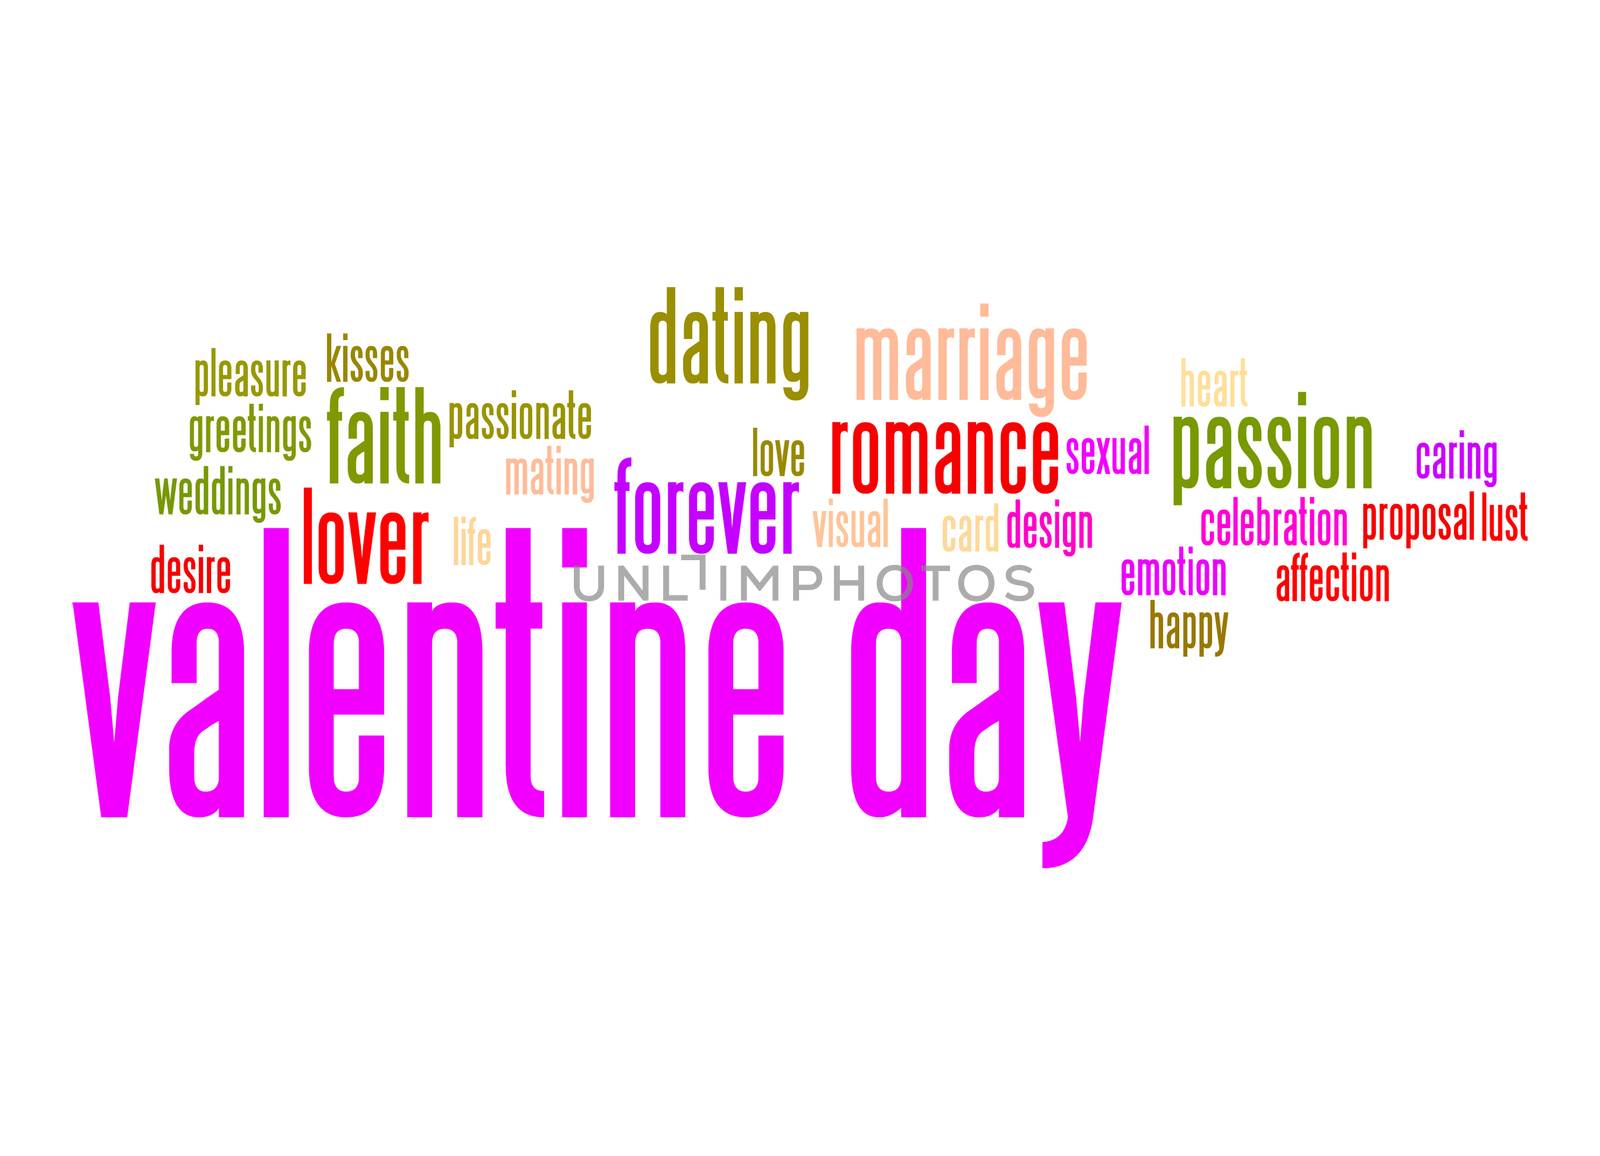 Valentine day word cloud by tang90246